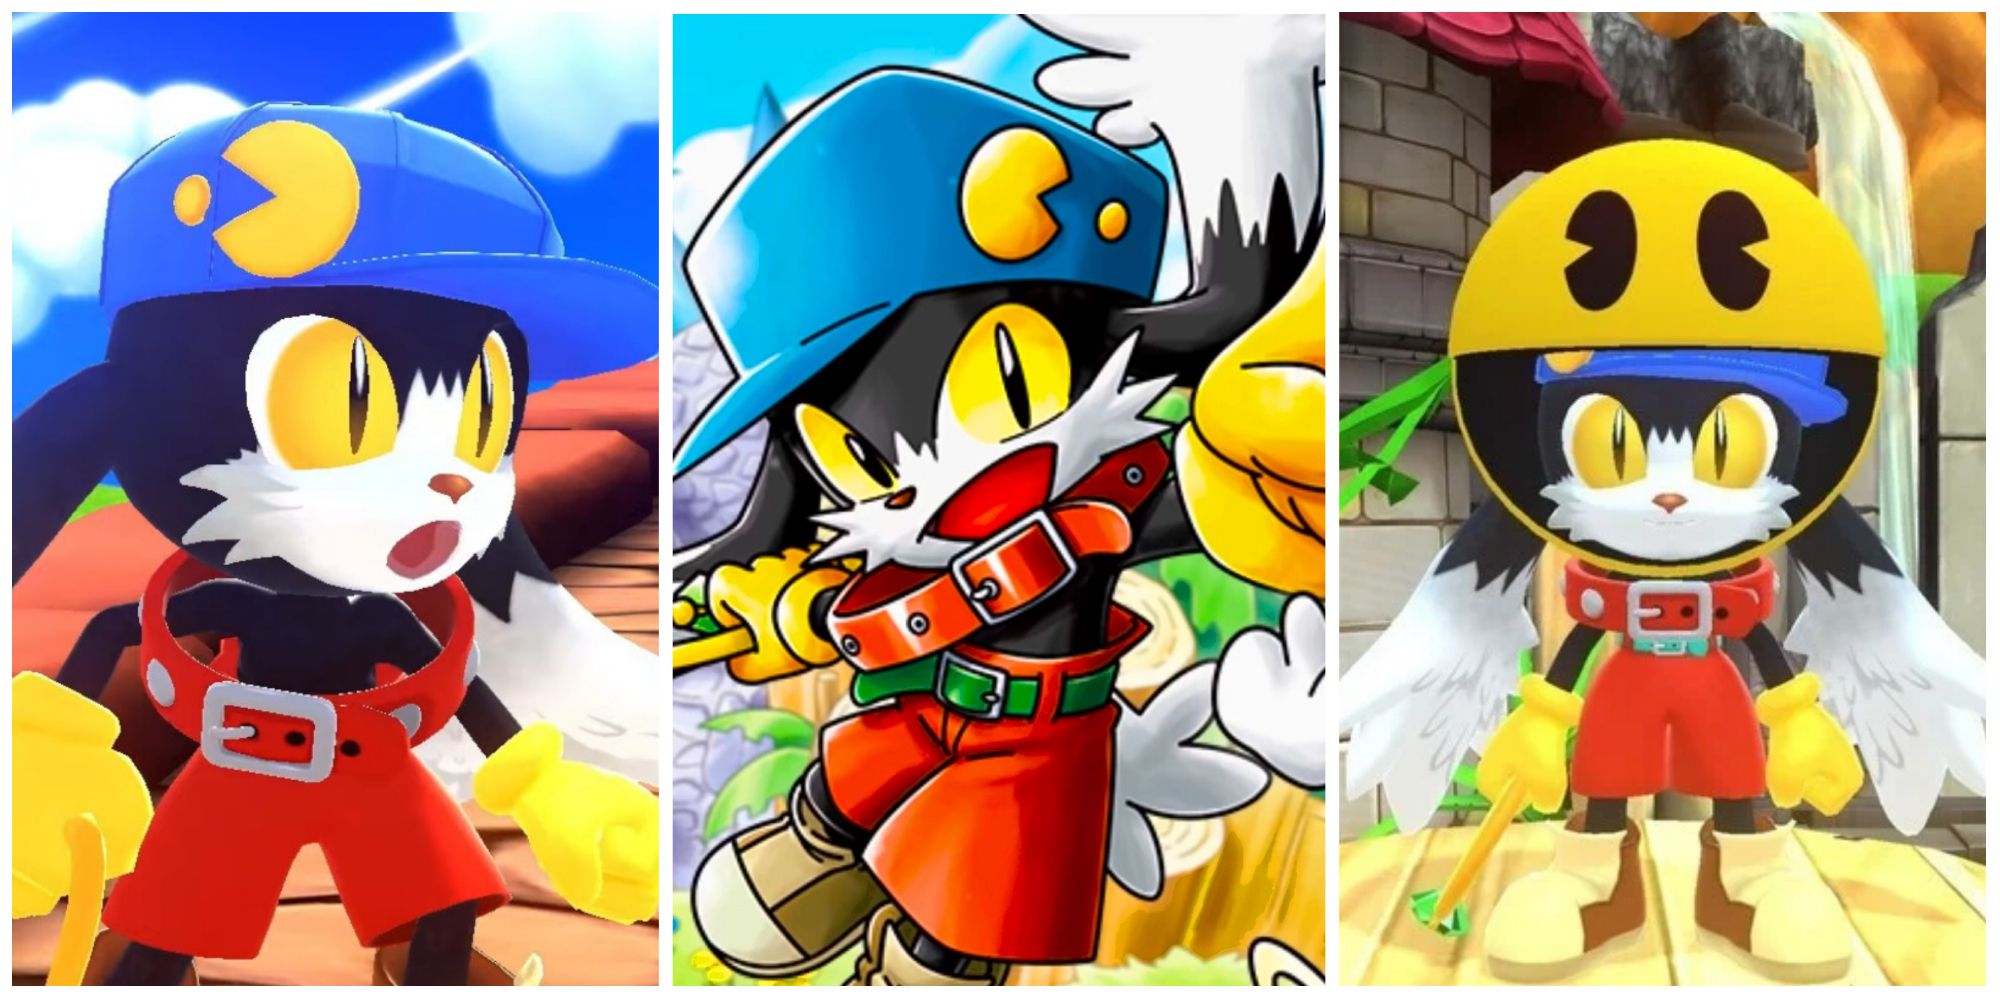 A collage of images from Klonoa Phantasy Reverie Series